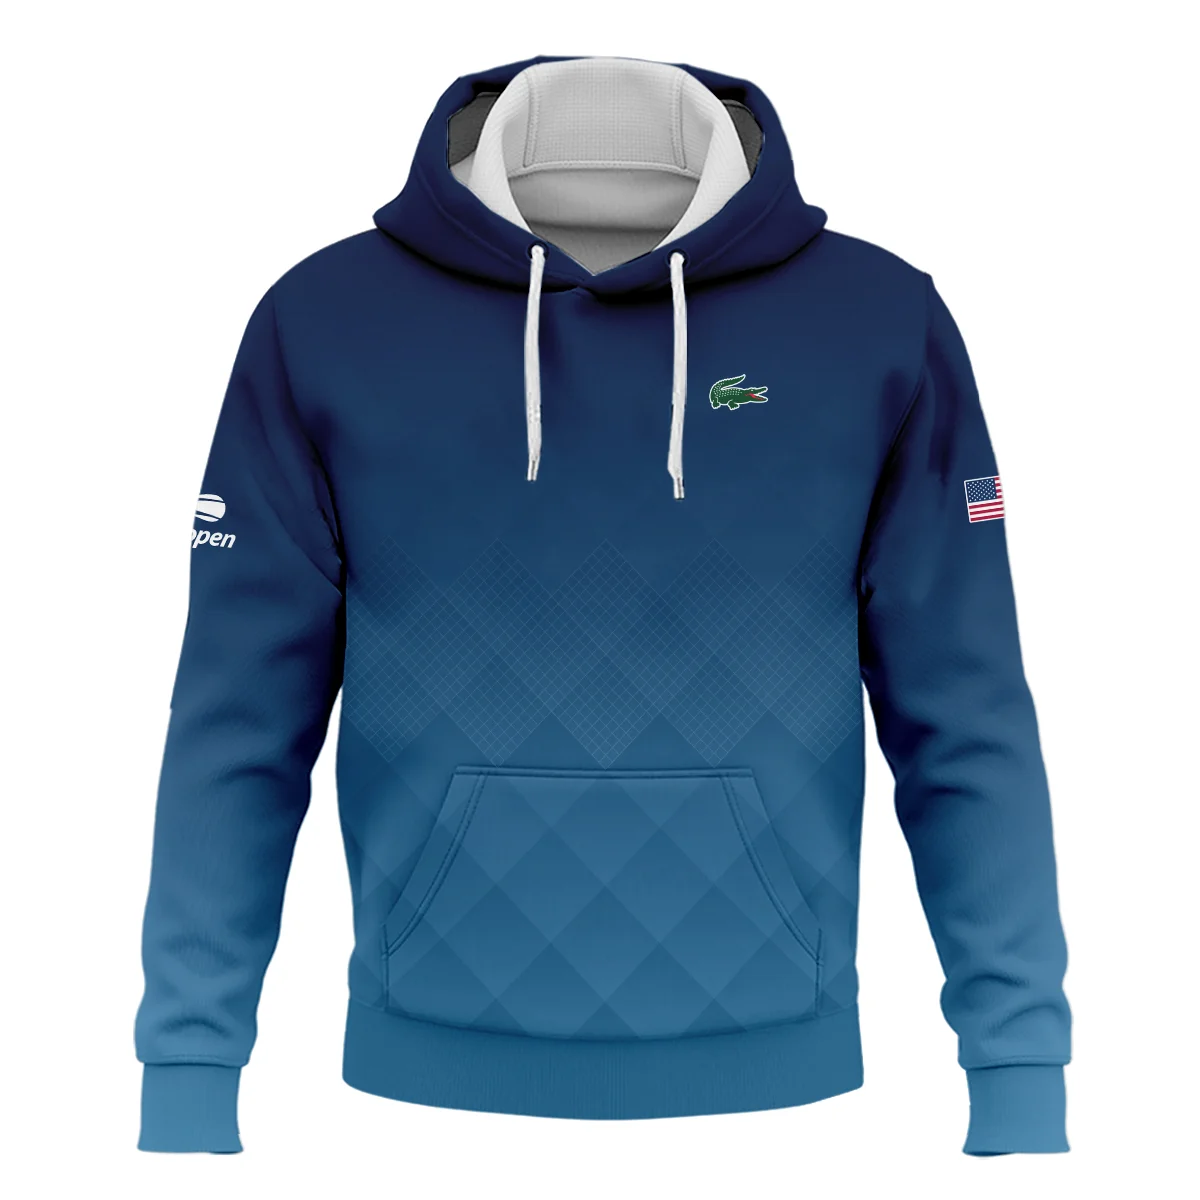 Lacoste Blue Abstract Background US Open Tennis Champions Quarter-Zip Jacket Style Classic Quarter-Zip Jacket